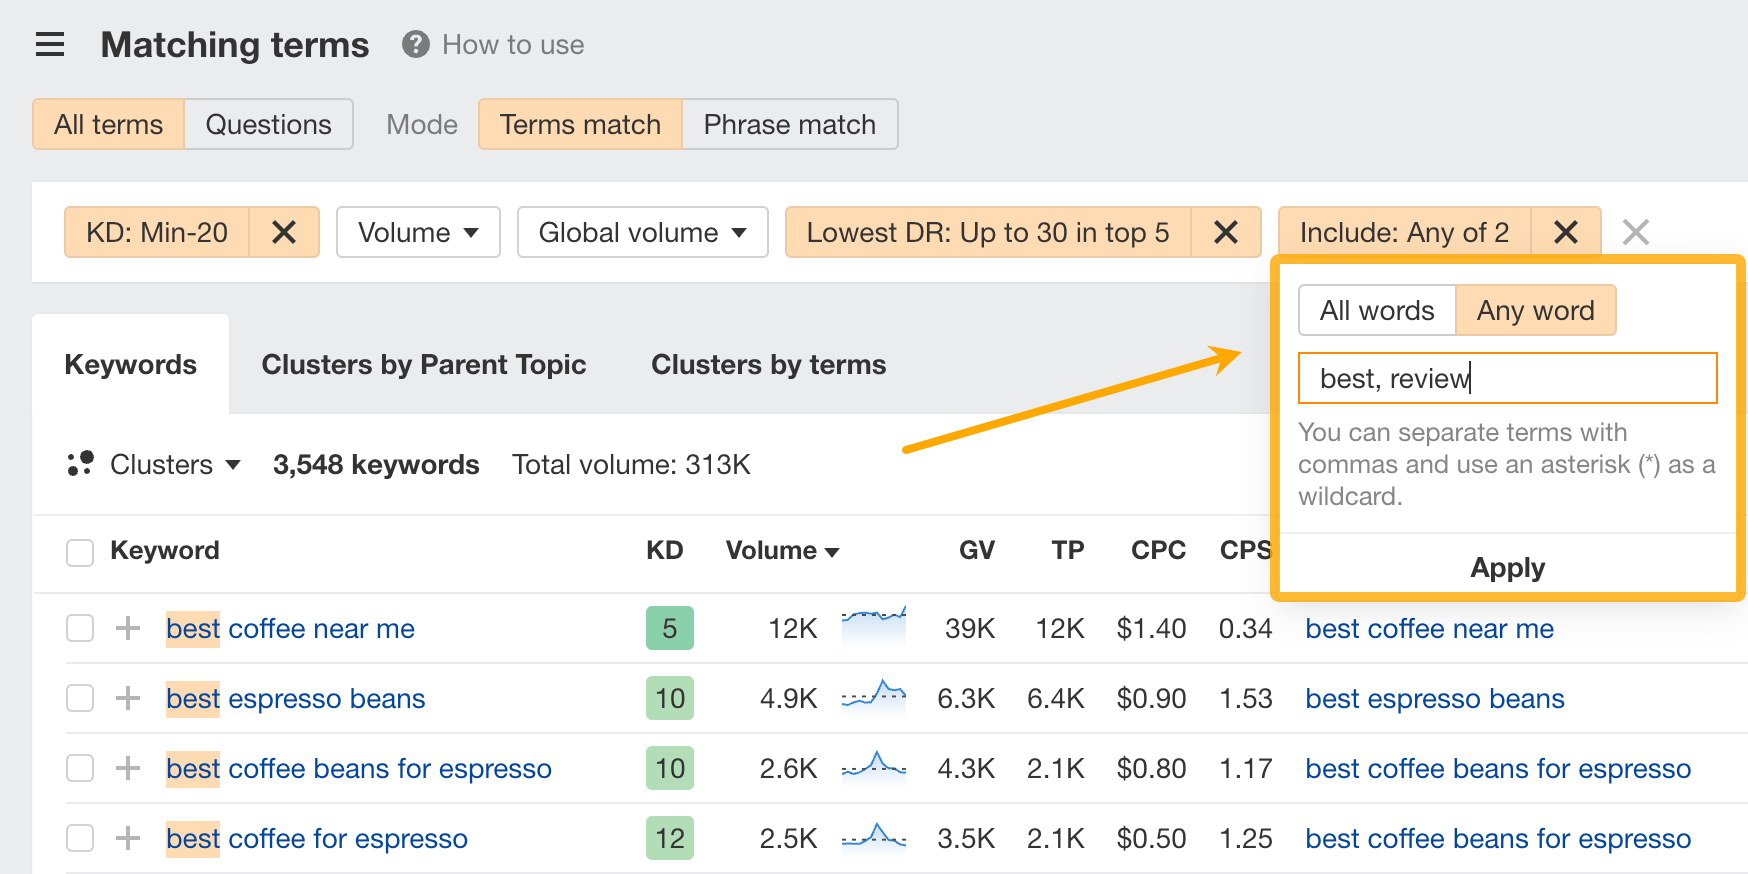 Filtering for keywords containing "best" or "review"
